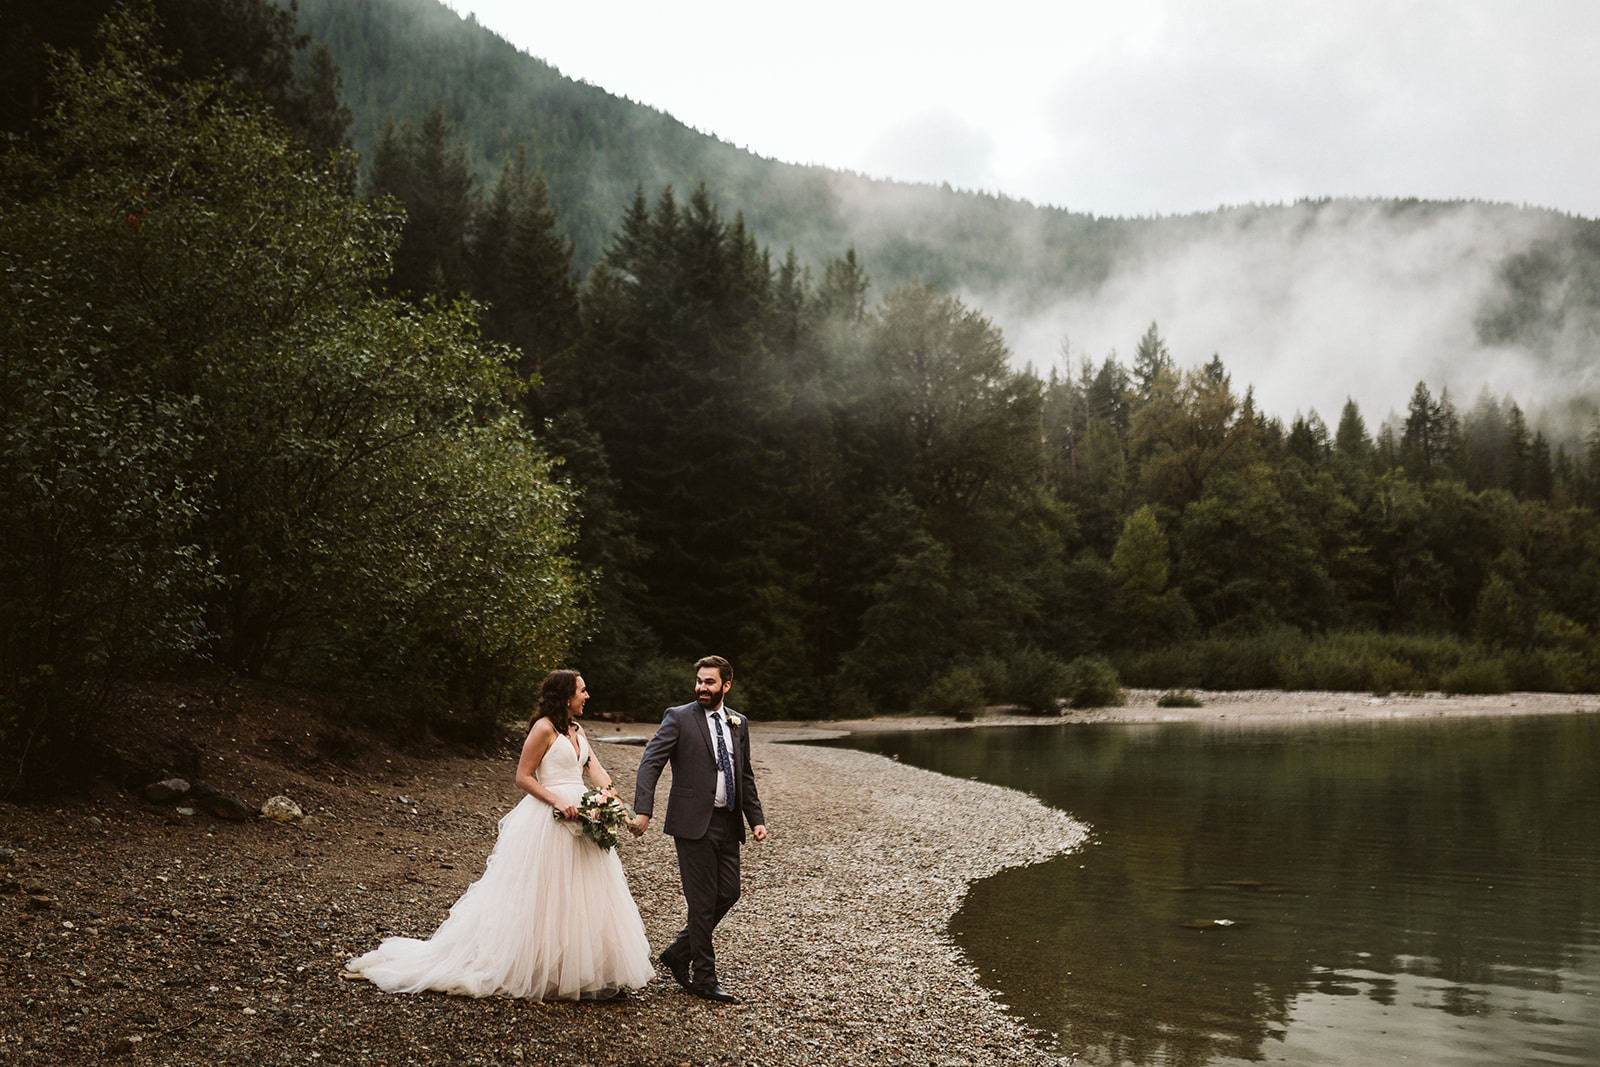 Bride and groom walk hand in hand on a rocky riverbank.